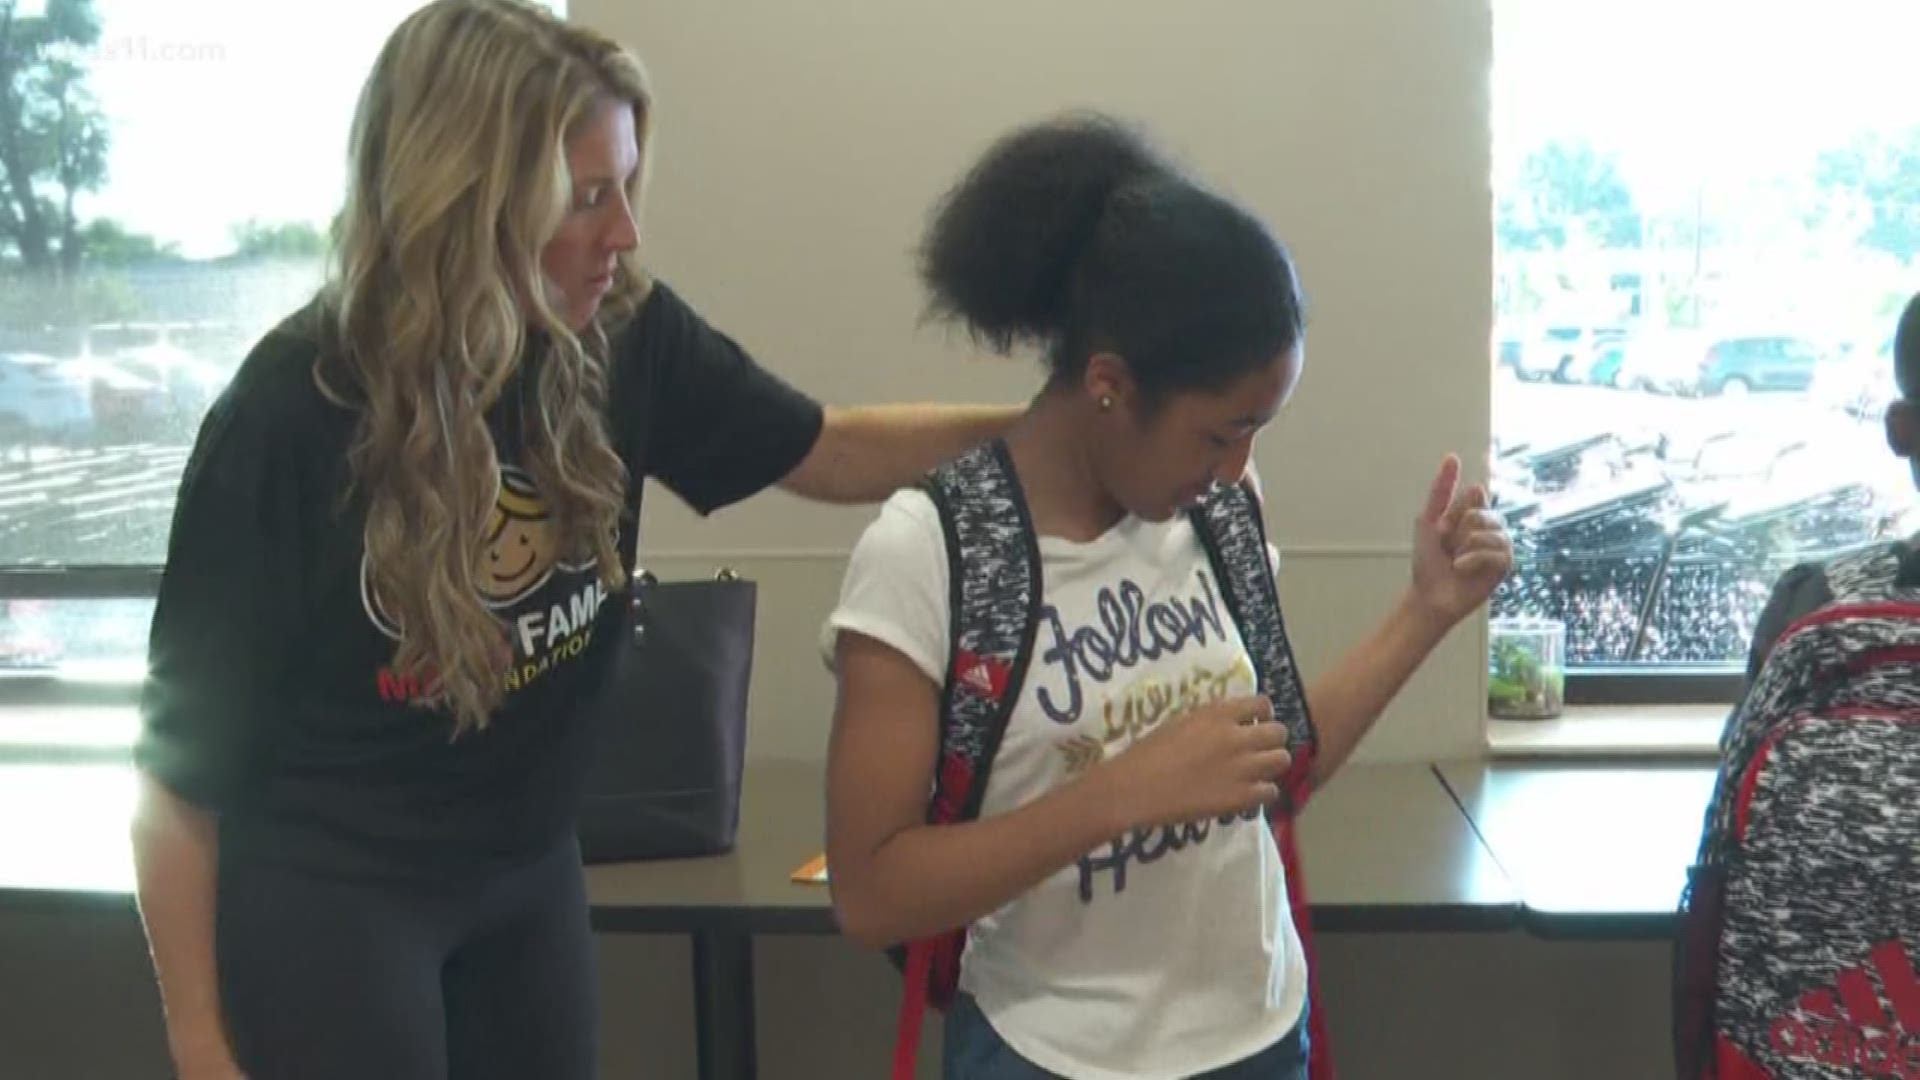 One hundred children and their families got a back to school surprise as volunteers handed them brand new backpacks loaded with school supplies for the upcoming school year.